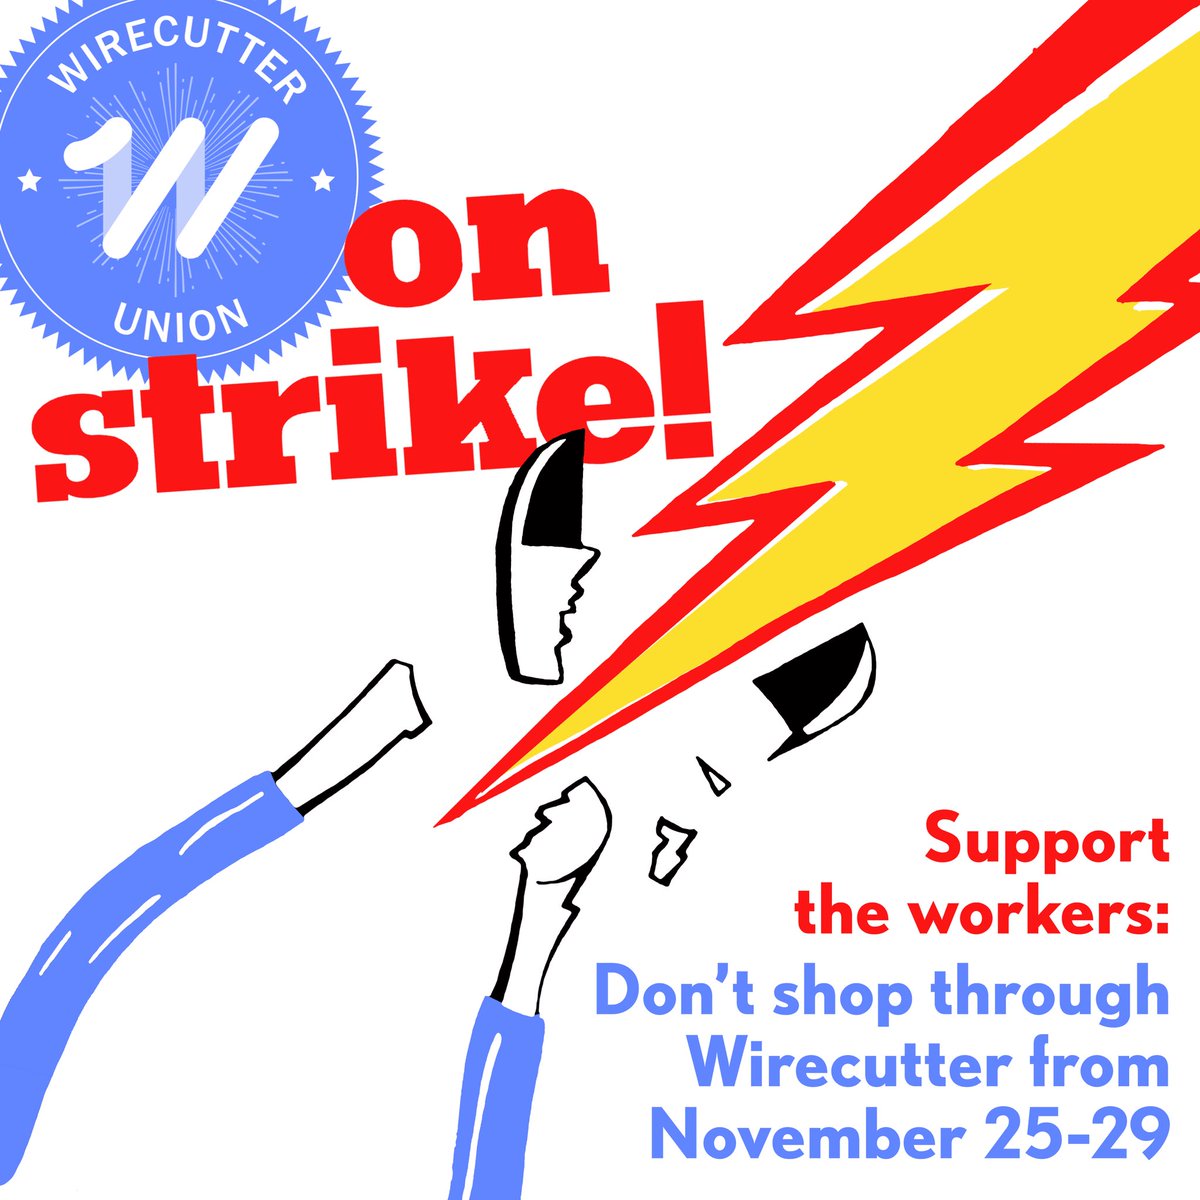 We are on strike! Don’t cross the digital picket line, now through November 29th. Sign up here to be kept up to date on our progress: wirecutterunion.com/support-us/